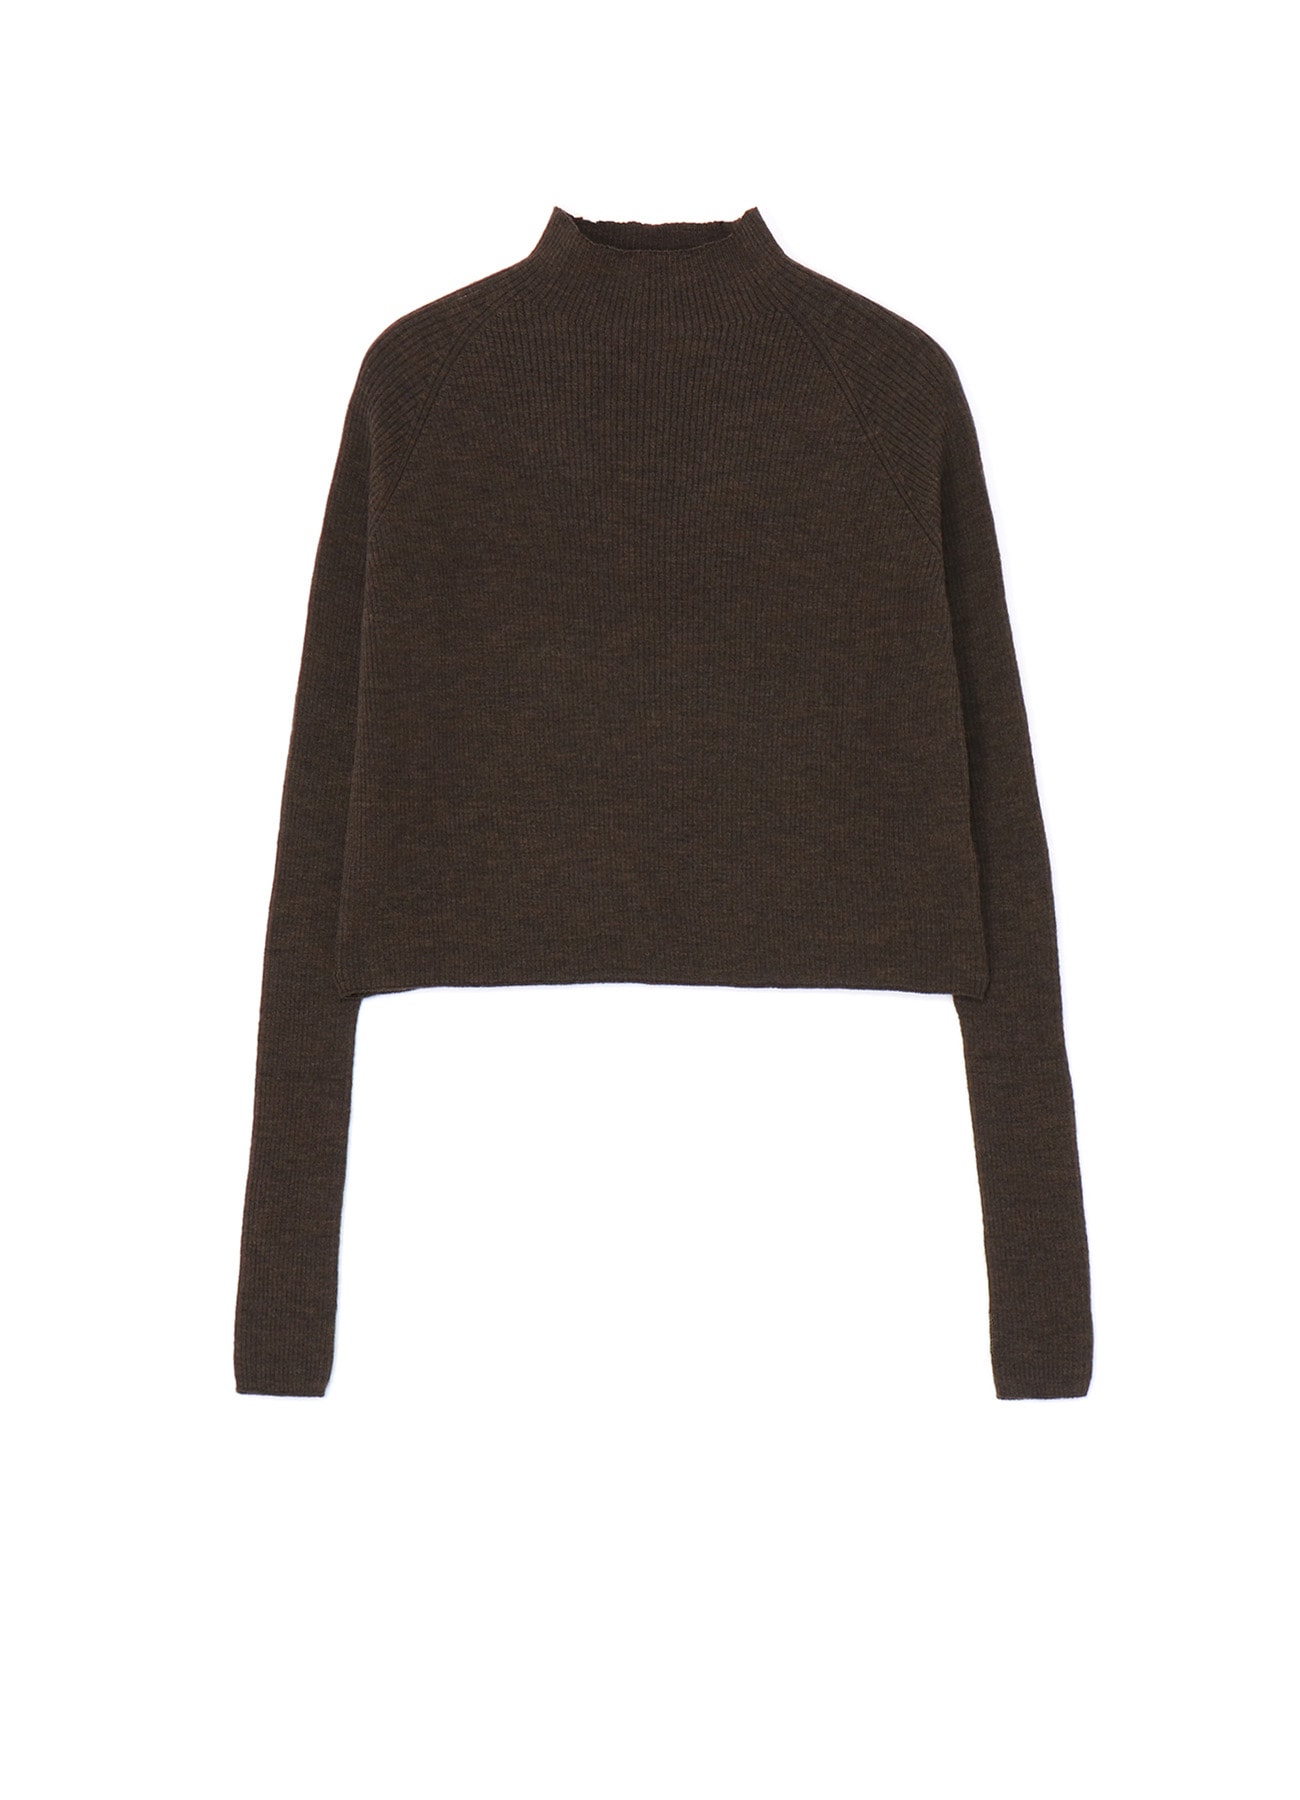 TURTLENECK SWEATER WITH FINGER HOLES